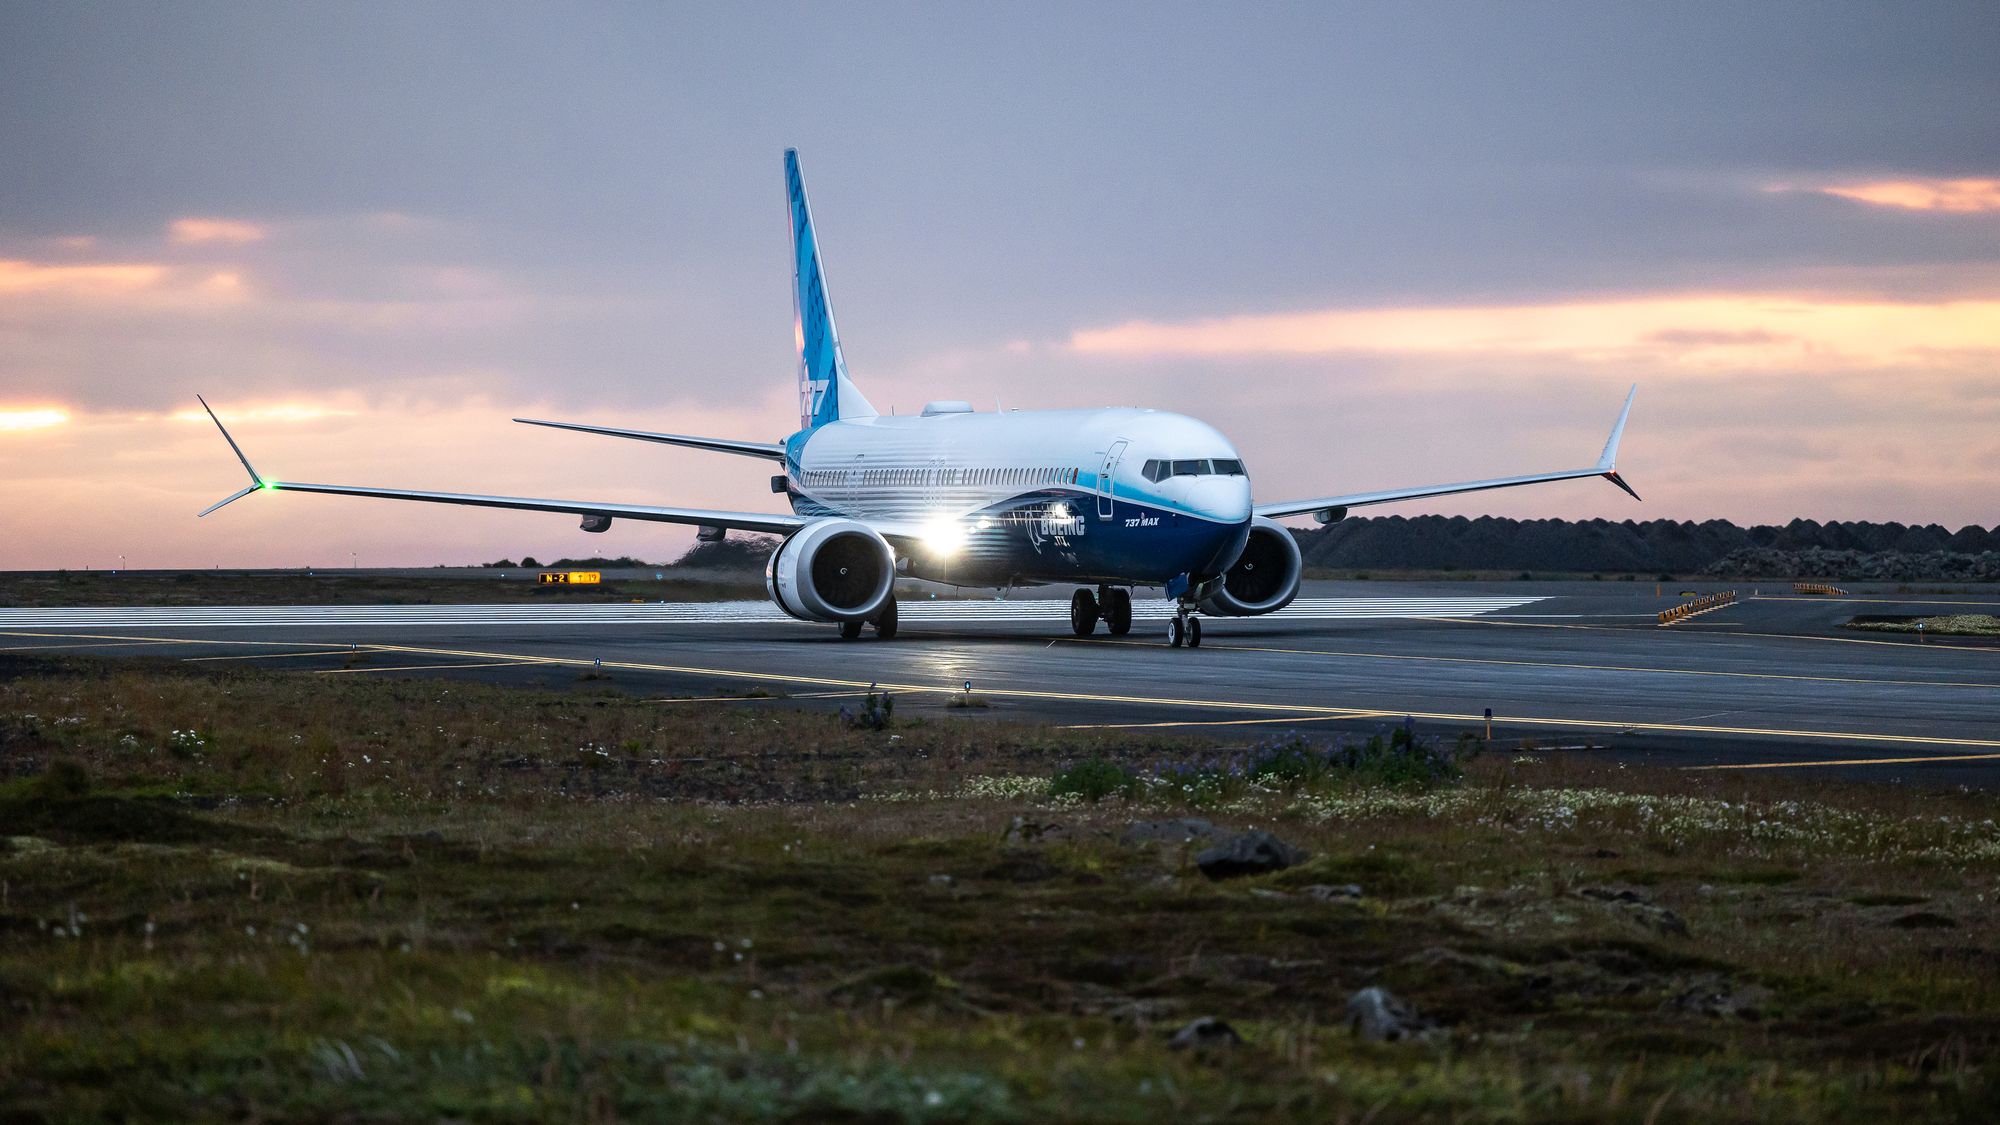 Africa: Boeing Forecasts a Demand for 1,025 New Airplanes Over the Next Two Decades